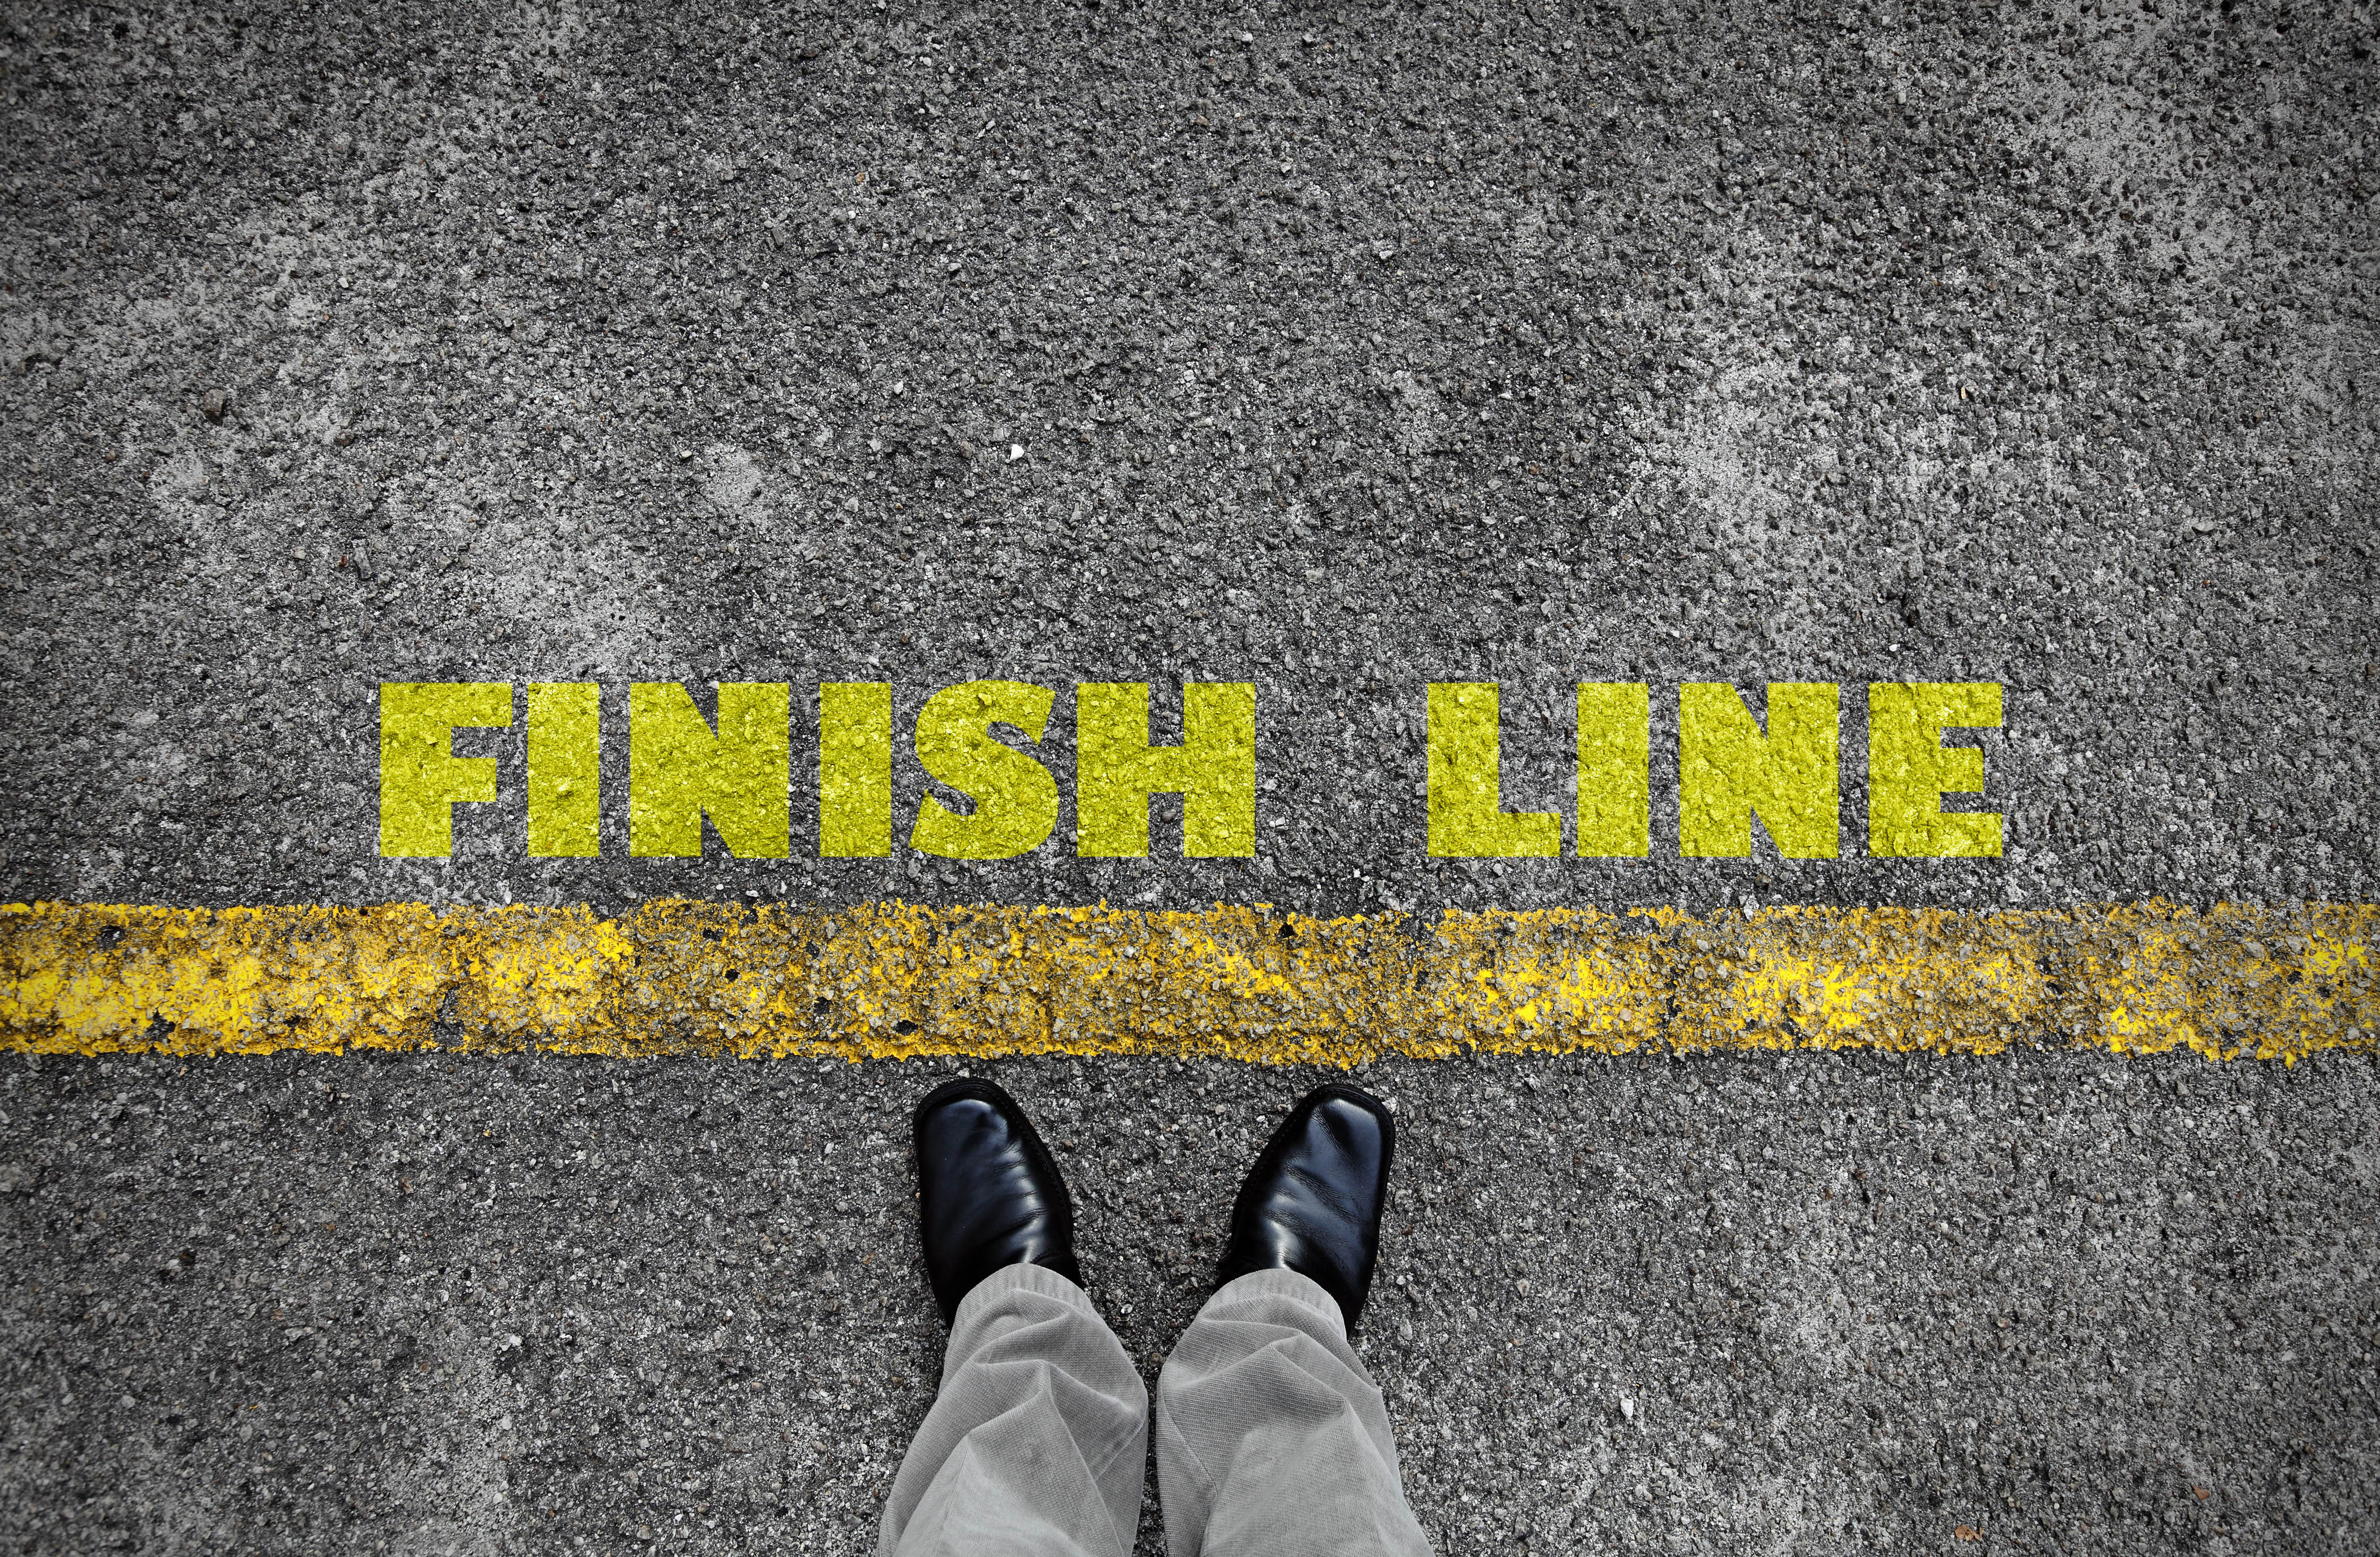 Finish line written in yellow text on a roadway